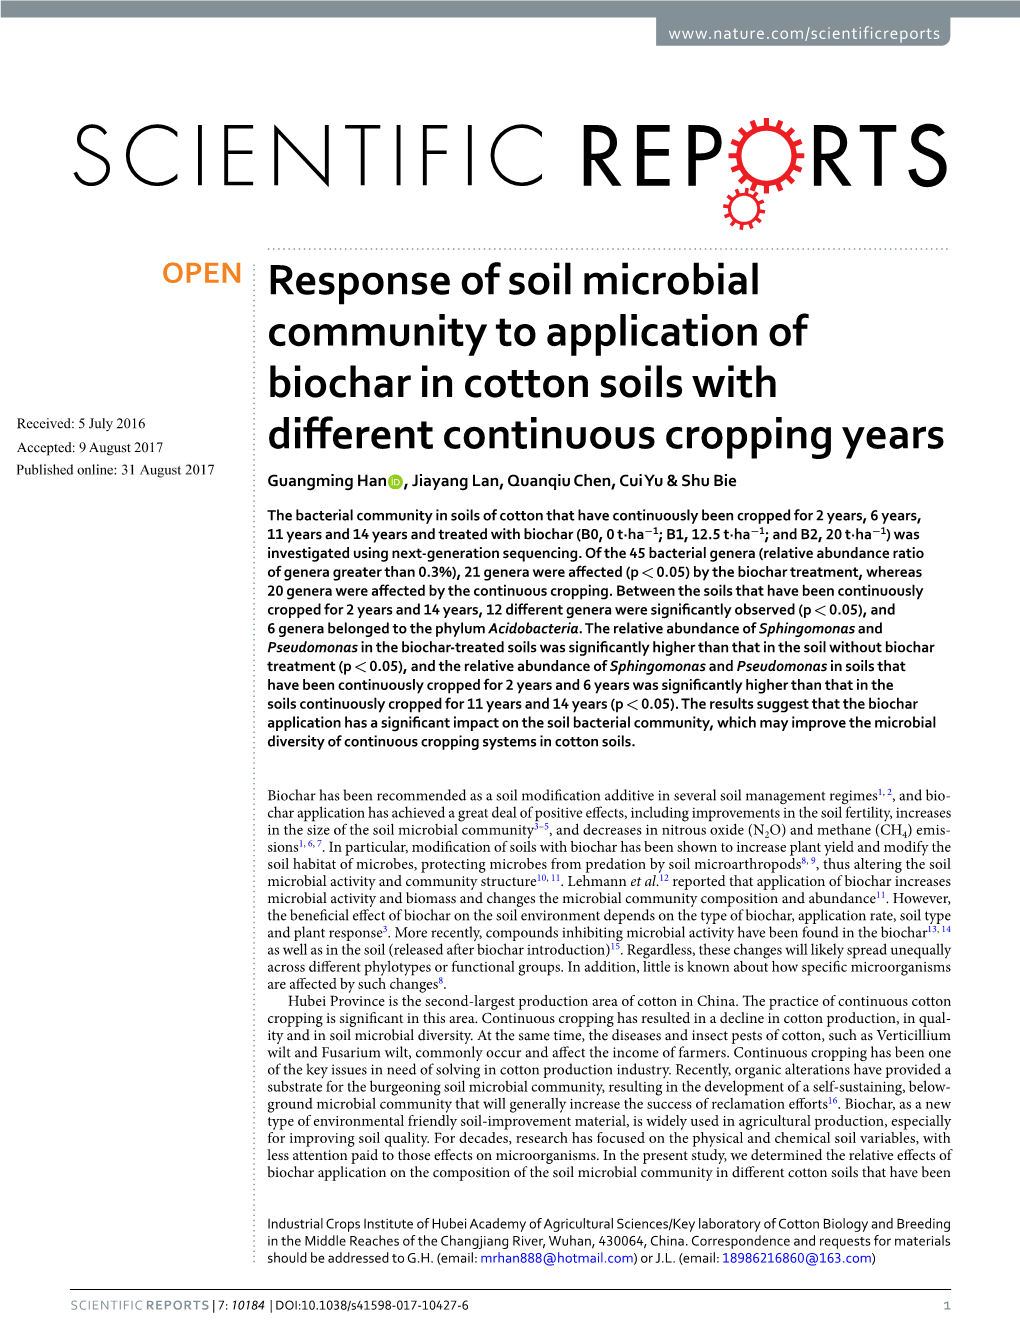 Response of Soil Microbial Community to Application of Biochar in Cotton